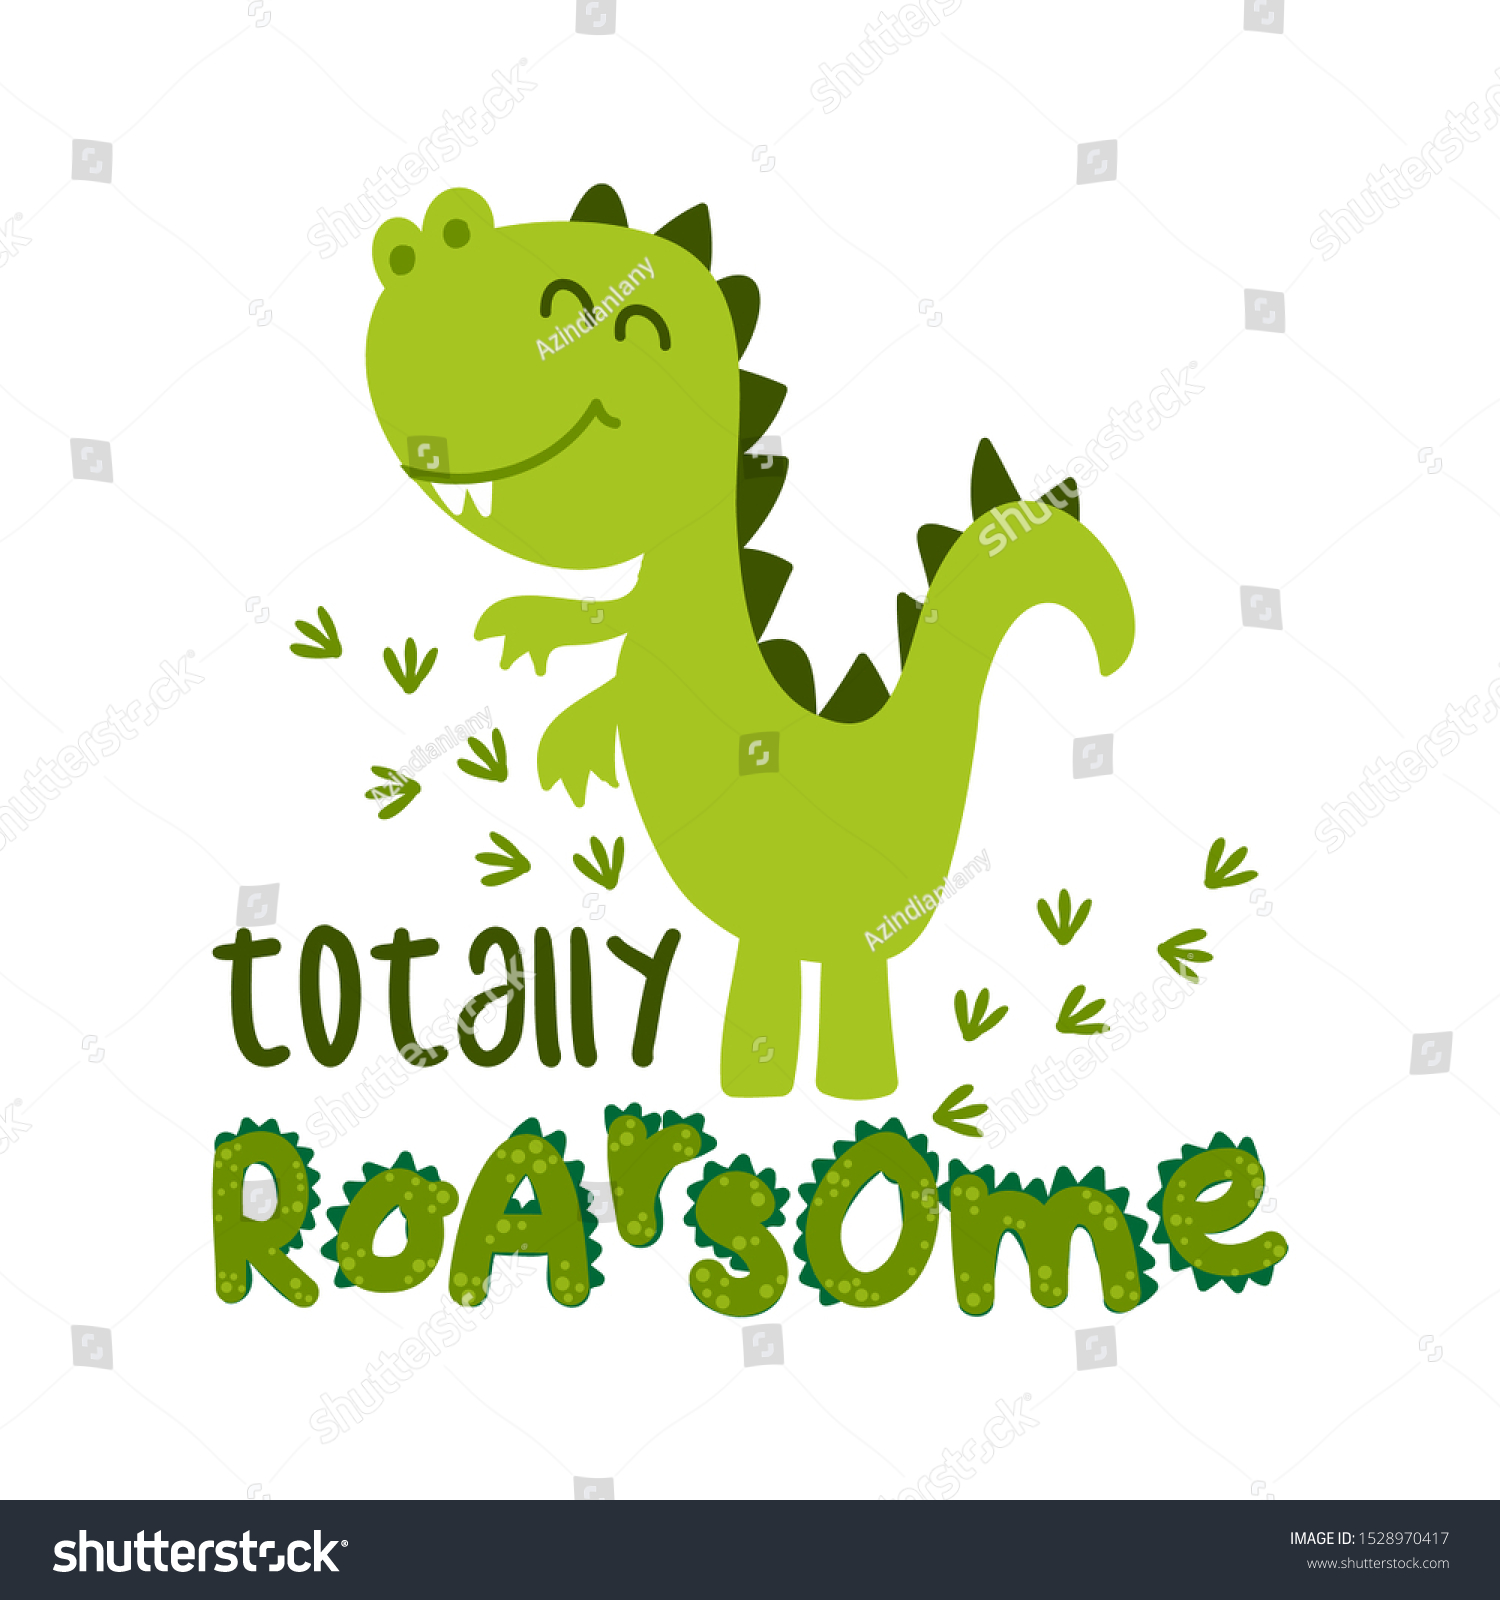 Totally Roarsome Awesome Cute Dino Print Stock Vector Royalty Free 1528970417